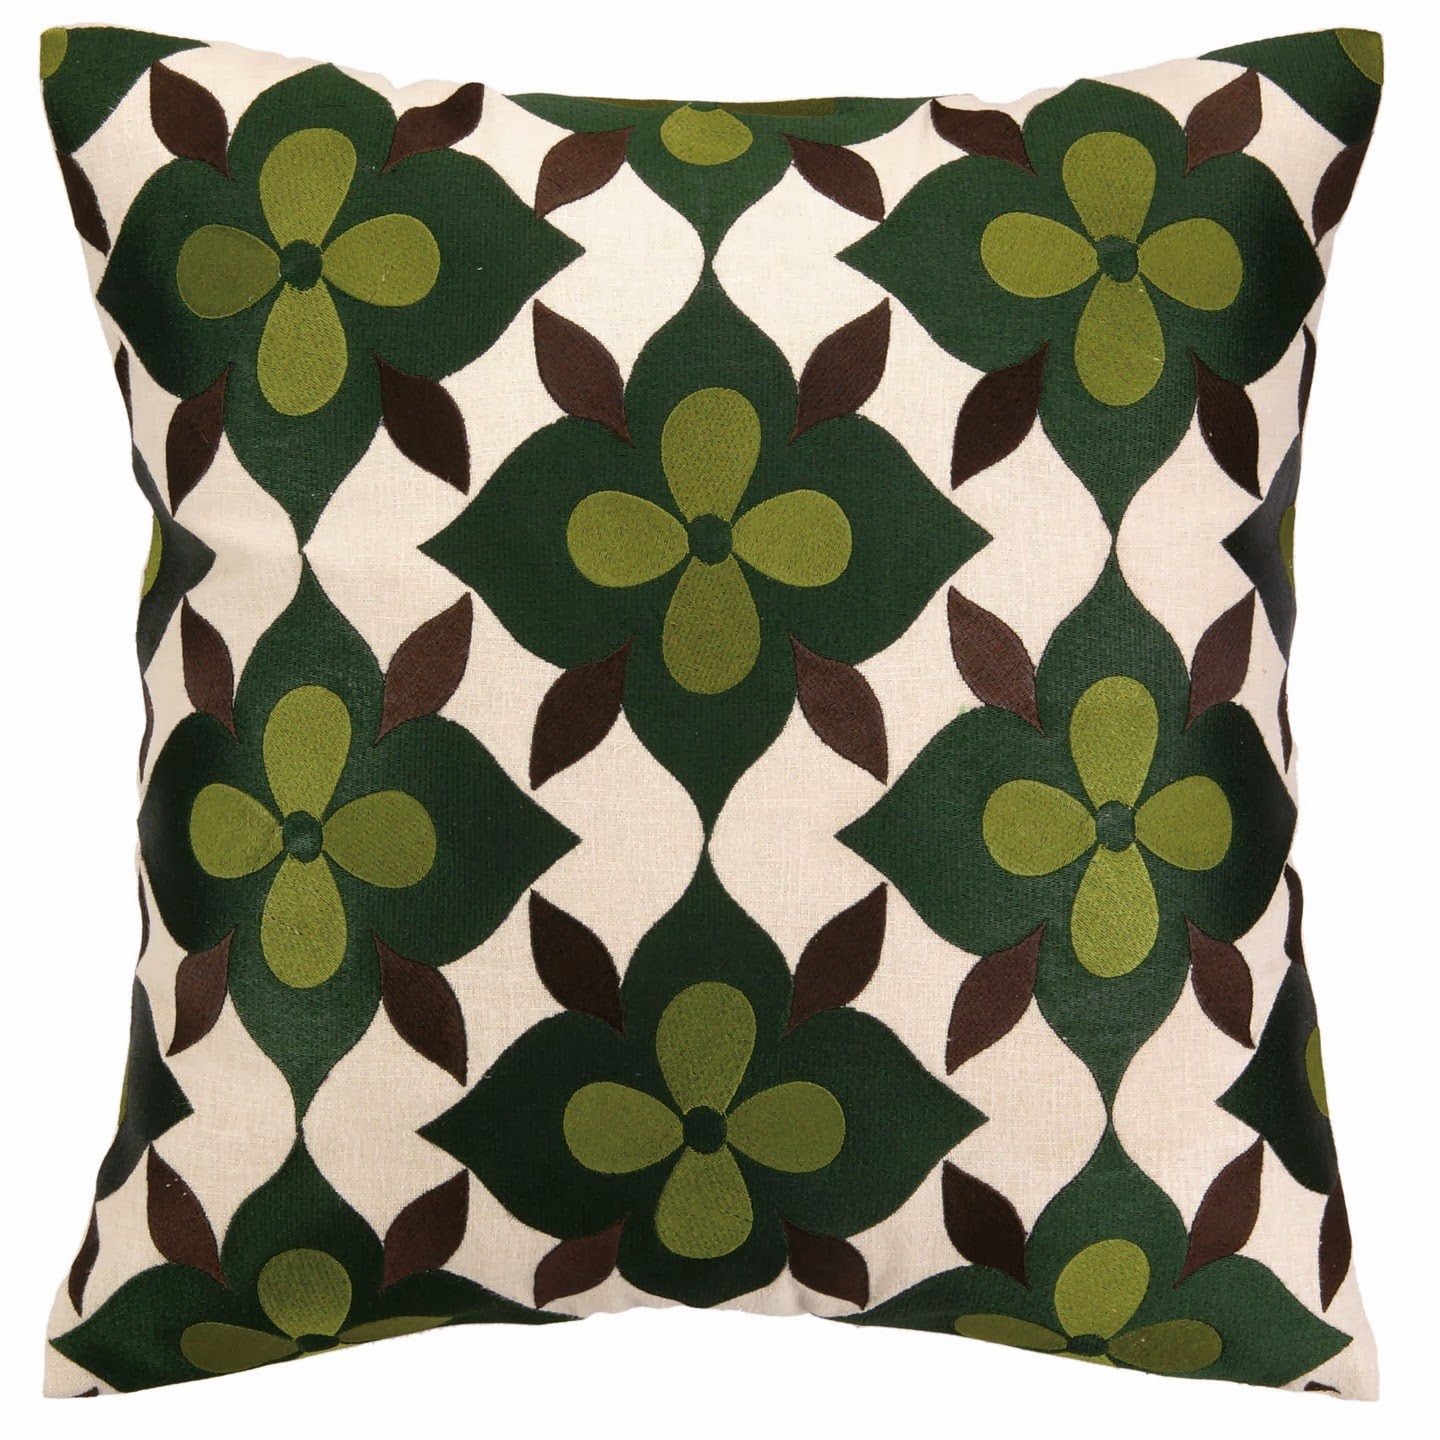 COCOCOZY Coco's Flower embroidered pillow in green, avocado and brown